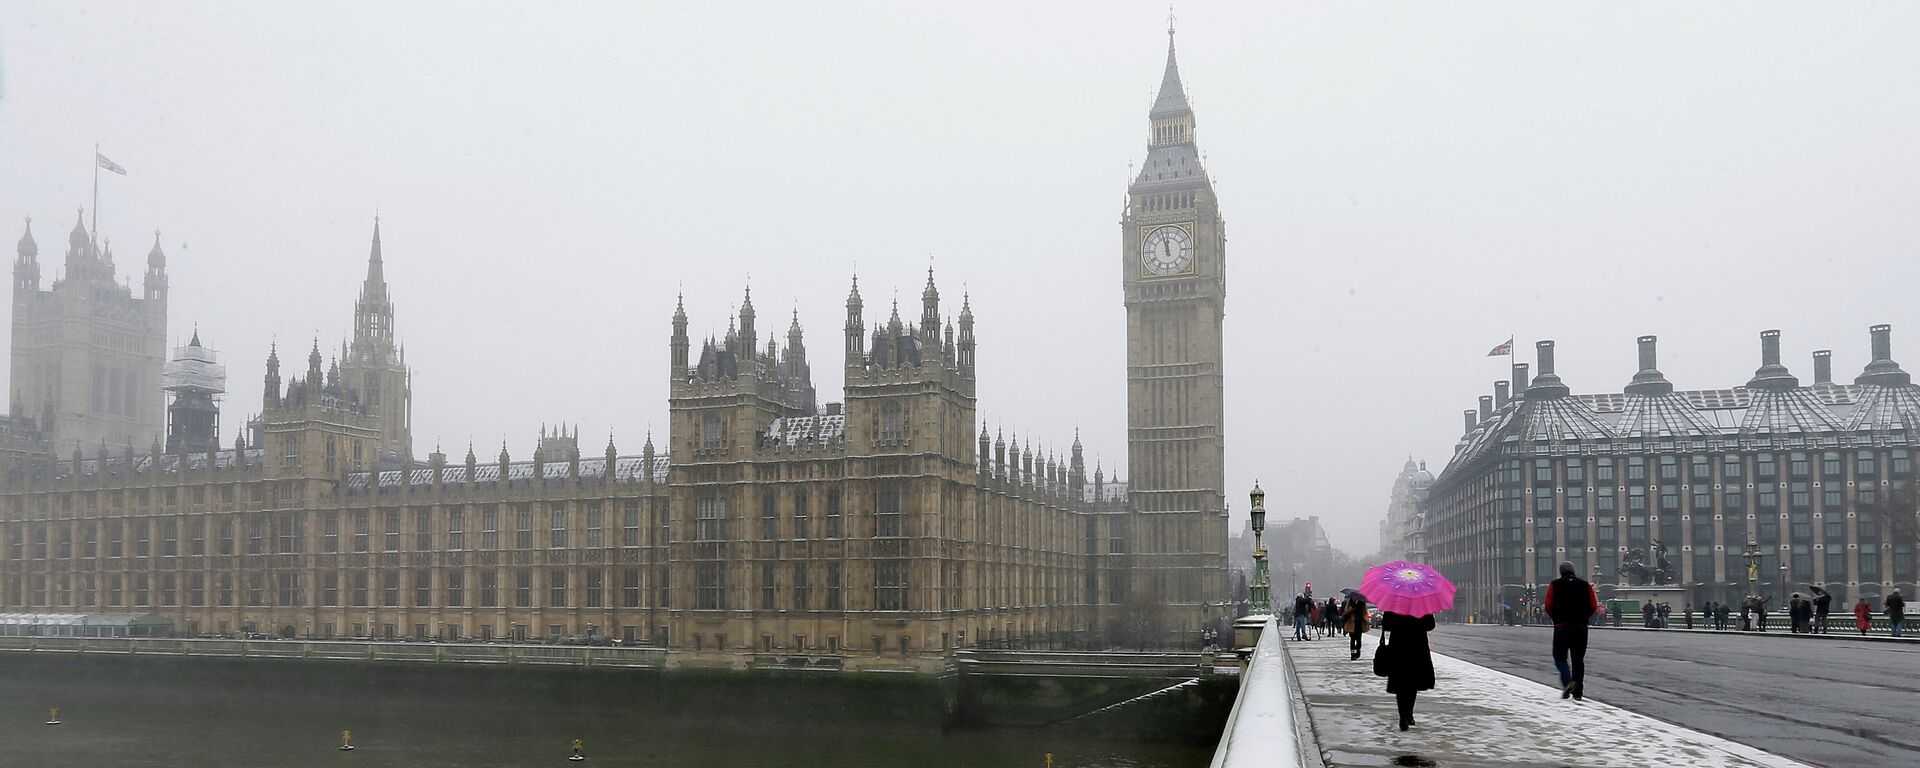 A woman carrying a pink umbrella walks across Westminster Bridge, with the Palace of Westminster in the background as it begins to snow in London, Friday, Jan. 18, 2013 - اسپوتنیک افغانستان  , 1920, 26.09.2022